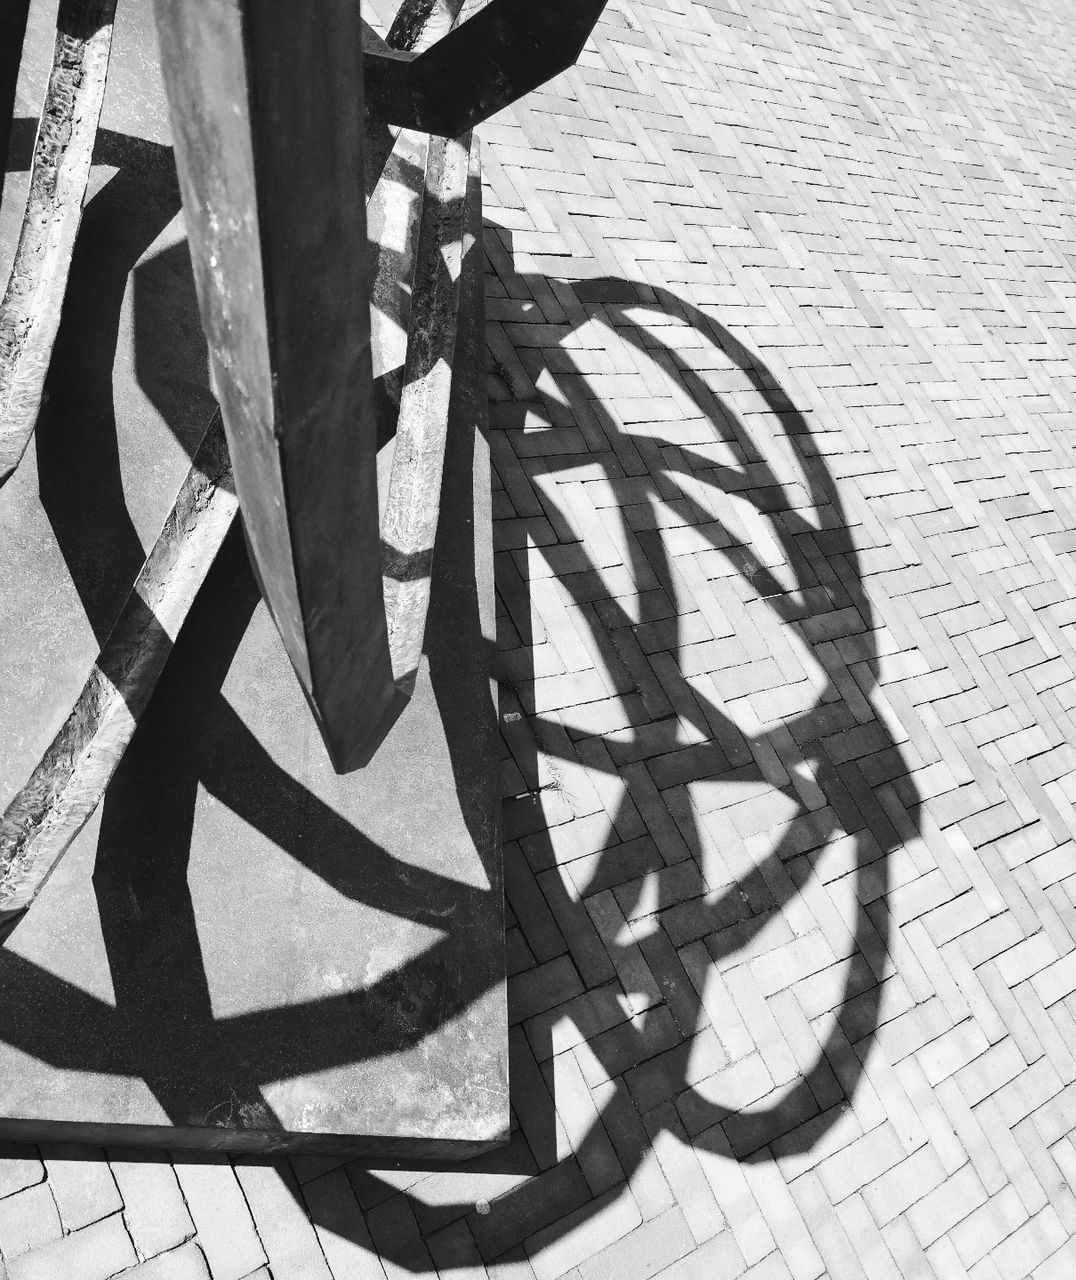 bicycle, shadow, transportation, street, high angle view, city, wheel, day, footpath, sunlight, no people, land vehicle, outdoors, mode of transportation, sidewalk, pattern, paving stone, wall - building feature, nature, road, focus on shadow